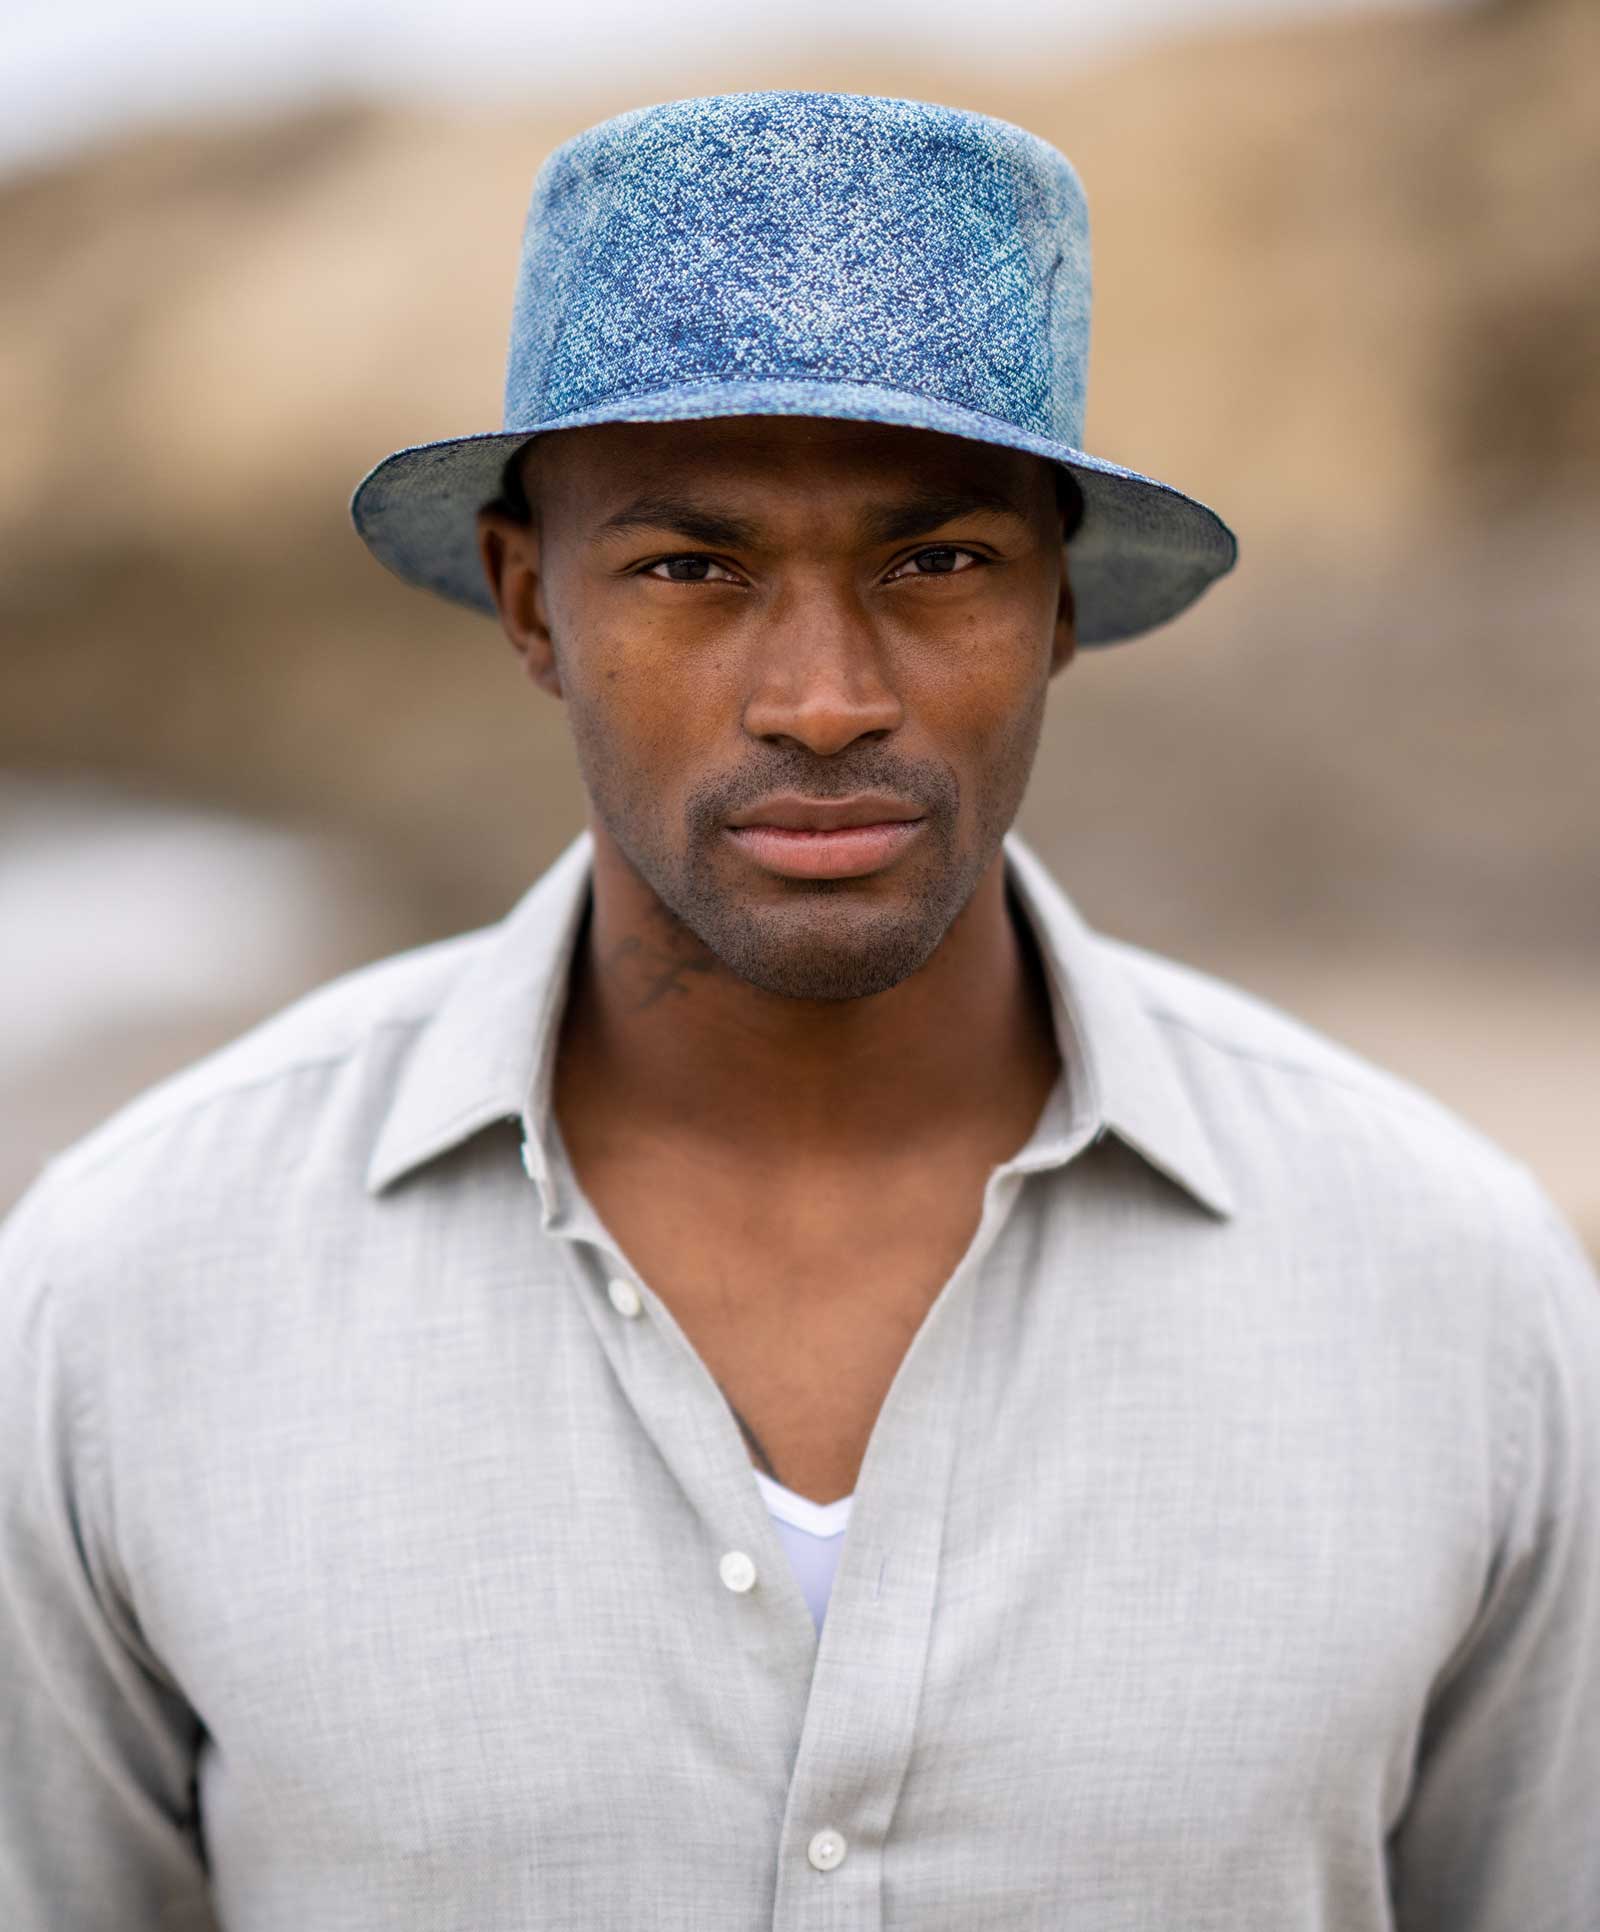 Design
Rarer than a perfect diamond and infinitely more refined, we are proud to carry the most exquisitely crafted Montecristi Panama straw hats in the world. This Montecristi Bucket Hat is hand-dyed with a unique Indigo Washed color.
Material
Exquisitely handwoven Montecristi straw, hand-dyed. All our hats are exquisitely handmade, therefore they are unique and not identical. Please allow a variation in the color combination.
Specifications
3 1/2 semi-flat crown and 1 3/4 to 2 brim. This Montecristi Bucket Hat is hand-dyed with a unique Indigo Washed color.Please allow 3-6 weeks to custom make this special piece.